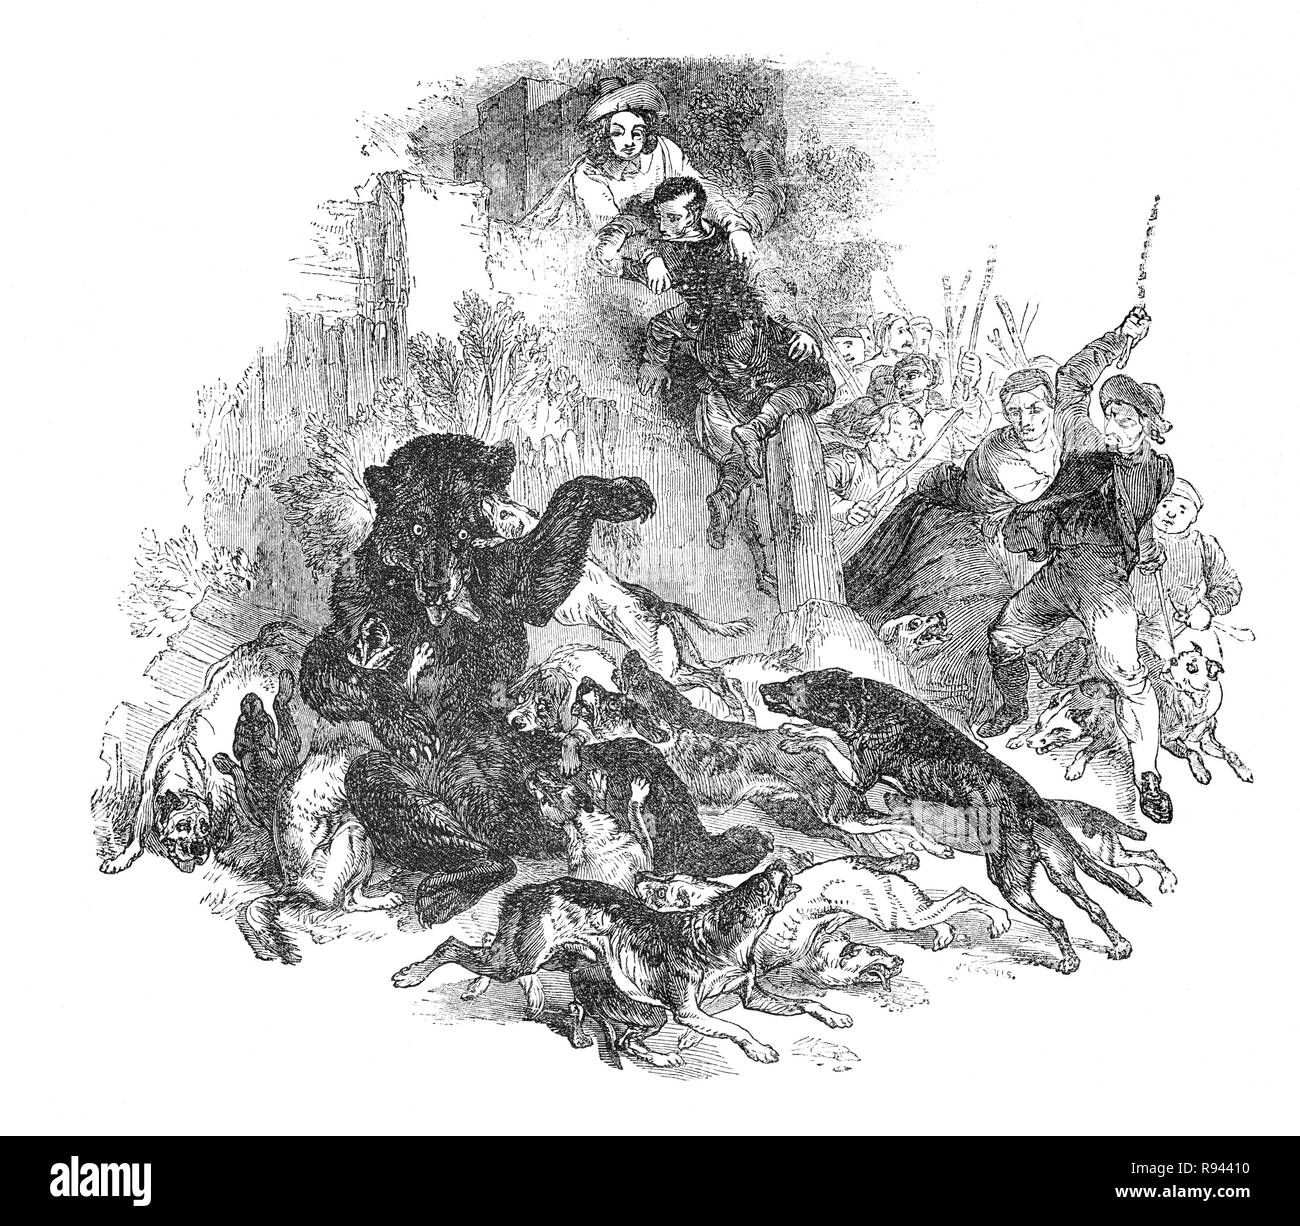 A scene from Hudibras, an English satirical polemic written by Samuel Butler(1613 – 1680), poet and satirist, mostly against Parliamenterians,Roundheads, Puritans, Presbyterians and other factions involved in the English Civil War of 1642-1651. The epic tells the story of Sir Hudibras and his squire, Ralpho who ride forth from the knight’s home to reform what they call sins and what the rest of the world regards as mild amusement. Here Sir Hudibras and Rapho rescue the bear from the cruelty of bear baiting with dogs. Stock Photo